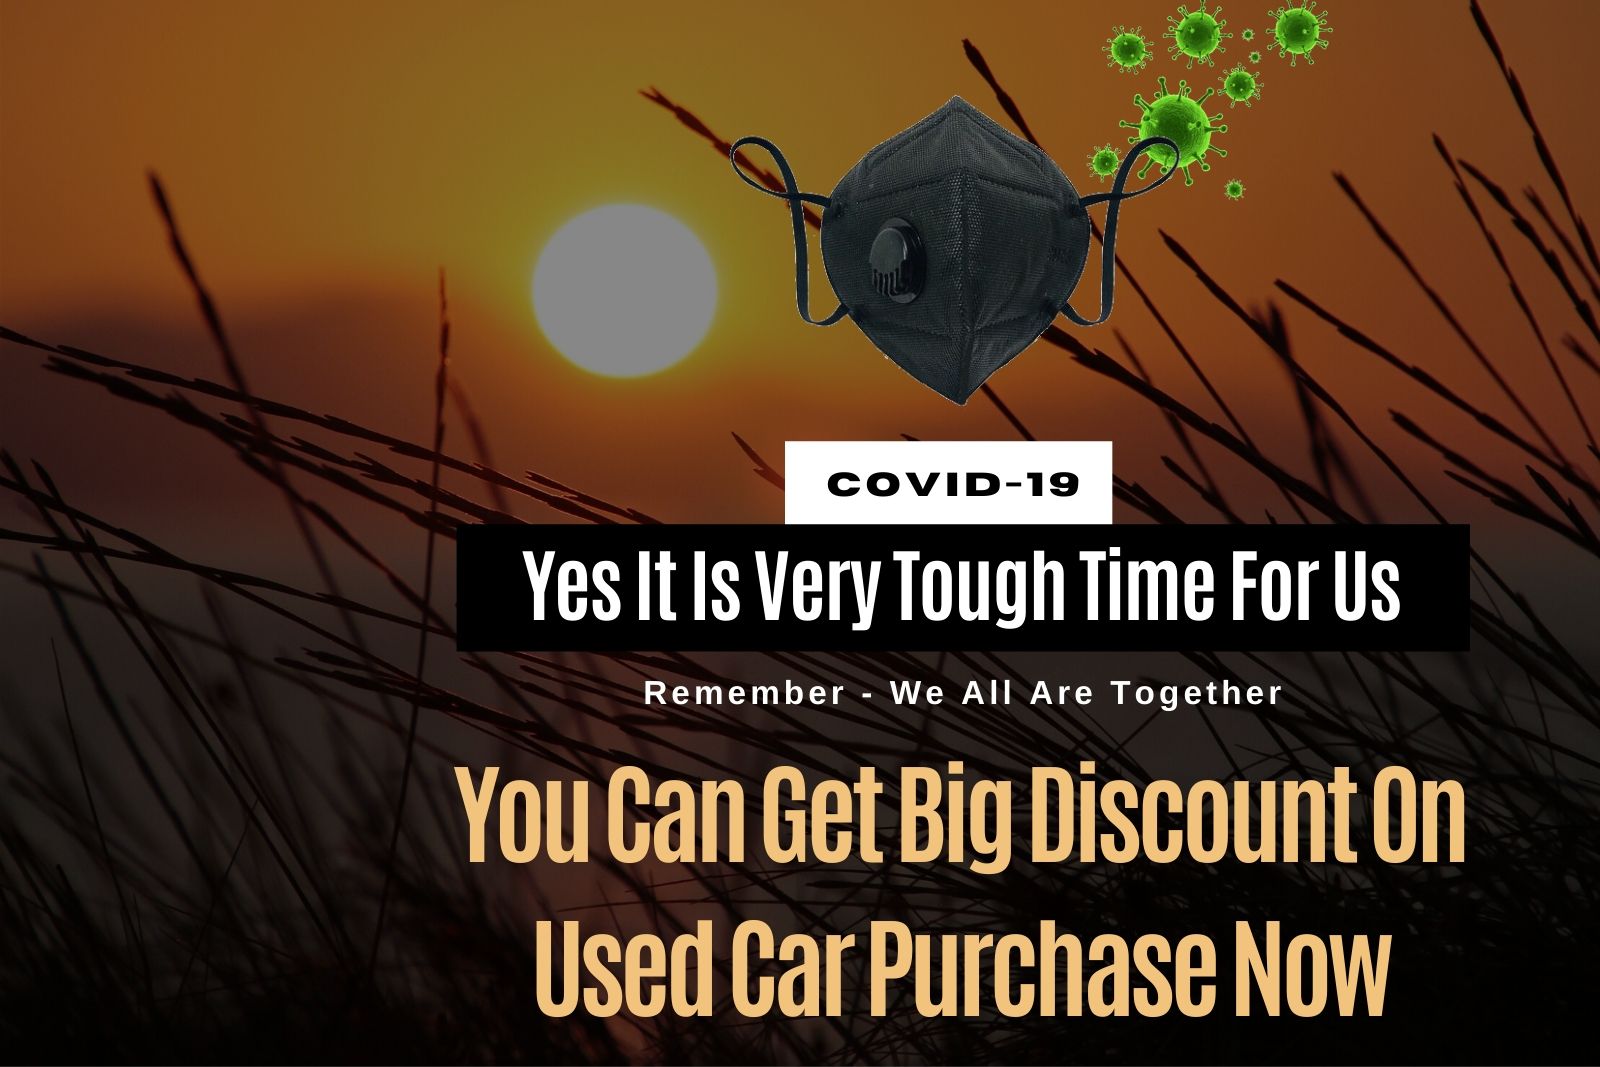 COVID 19 - Buying A Used Car Is The Right Decision Now?